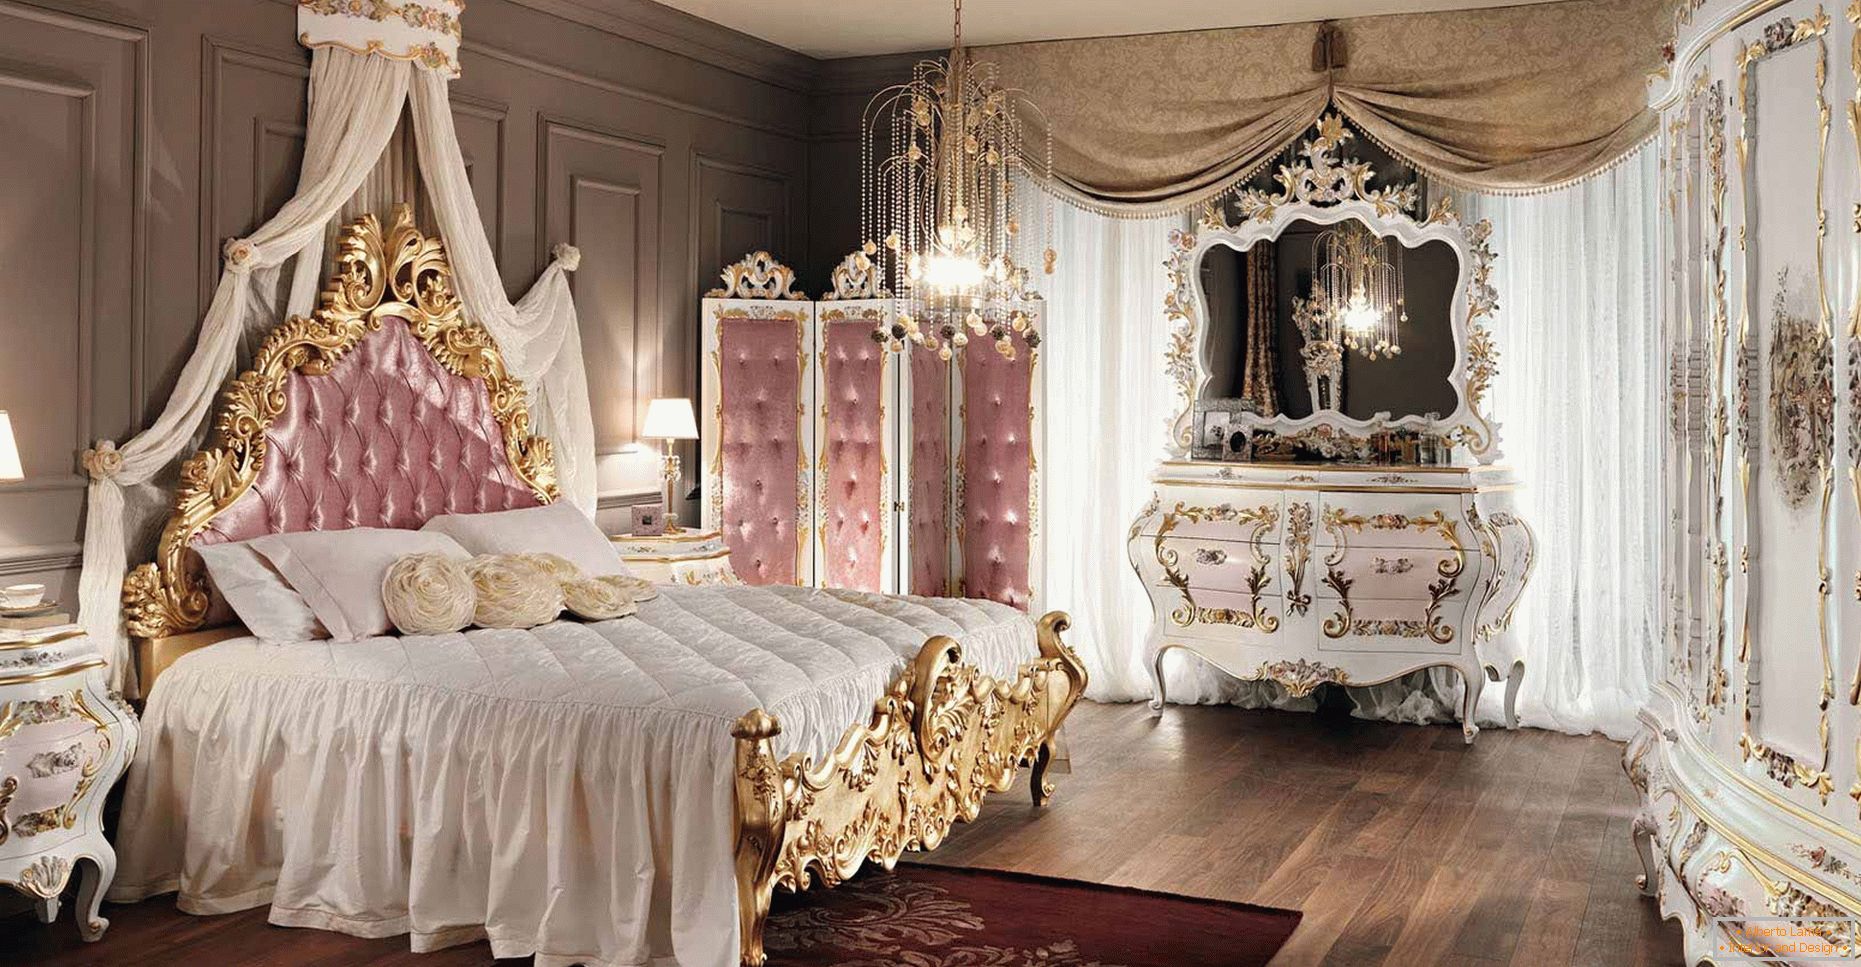 Pompous, majestic bedroom for a young lady.